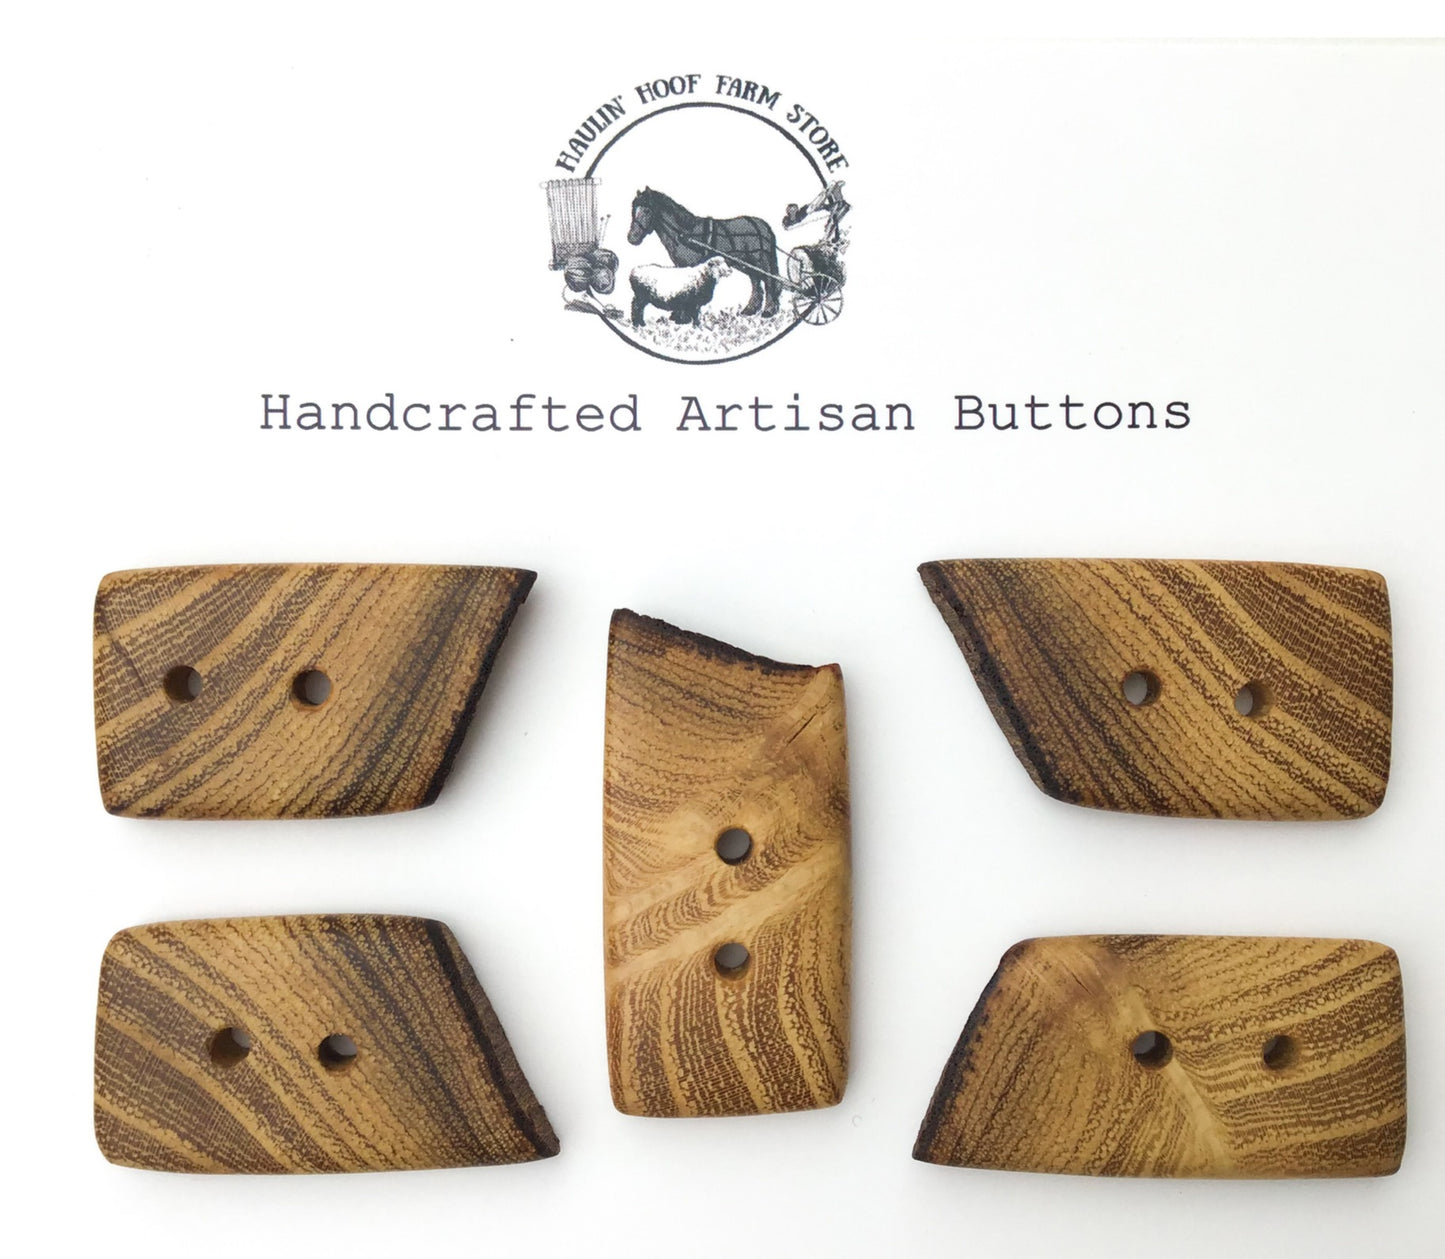 Black Locust Wood Buttons - Live Edge Wood Buttons - Wood Toggle Buttons - 3/4" x 1 1/2" - 5 Pack